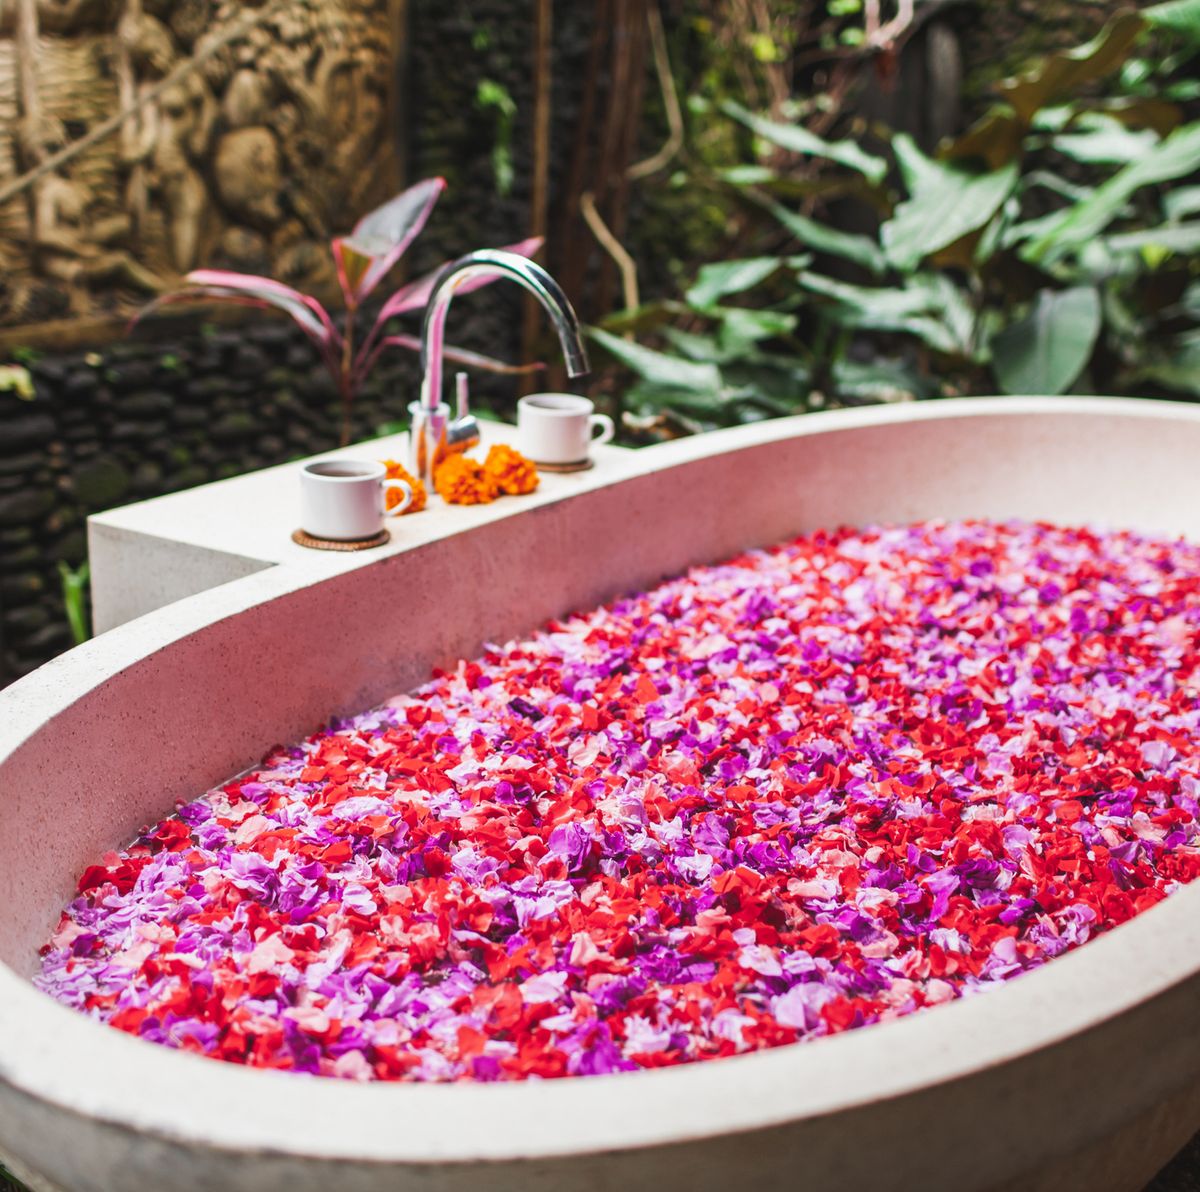 https://hips.hearstapps.com/hmg-prod/images/stone-bath-tub-full-of-flower-petals-in-balinese-royalty-free-image-1667849494.jpg?crop=0.671xw:1.00xh;0.0721xw,0&resize=1200:*